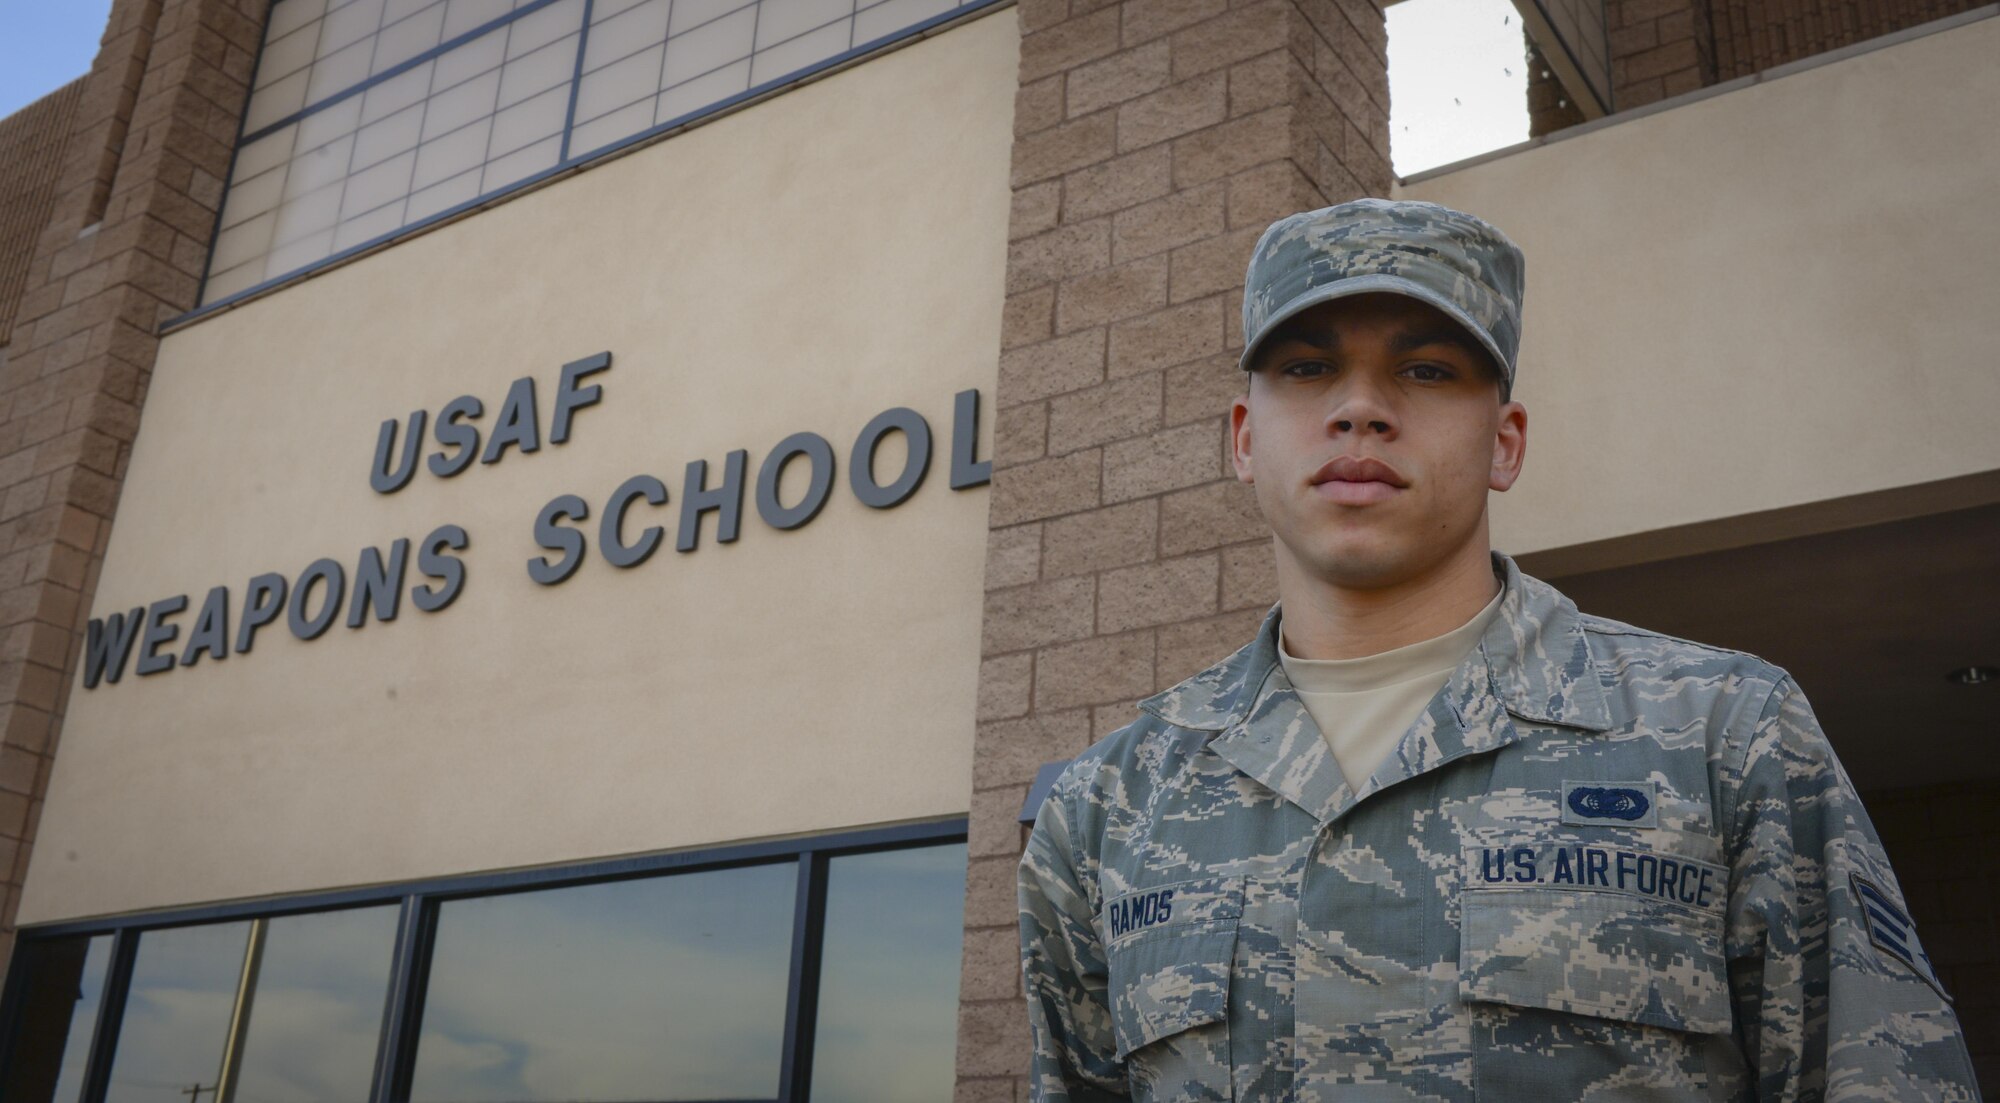 Senior Airman Edward Ramos, United States Air Force Weapons School command section administrator, poses in front of the USAFWS at Nellis Air Force Base, Nev., April 4, 2016. Ramos assisted four passengers who were in a car wreck on March 25, 2016.